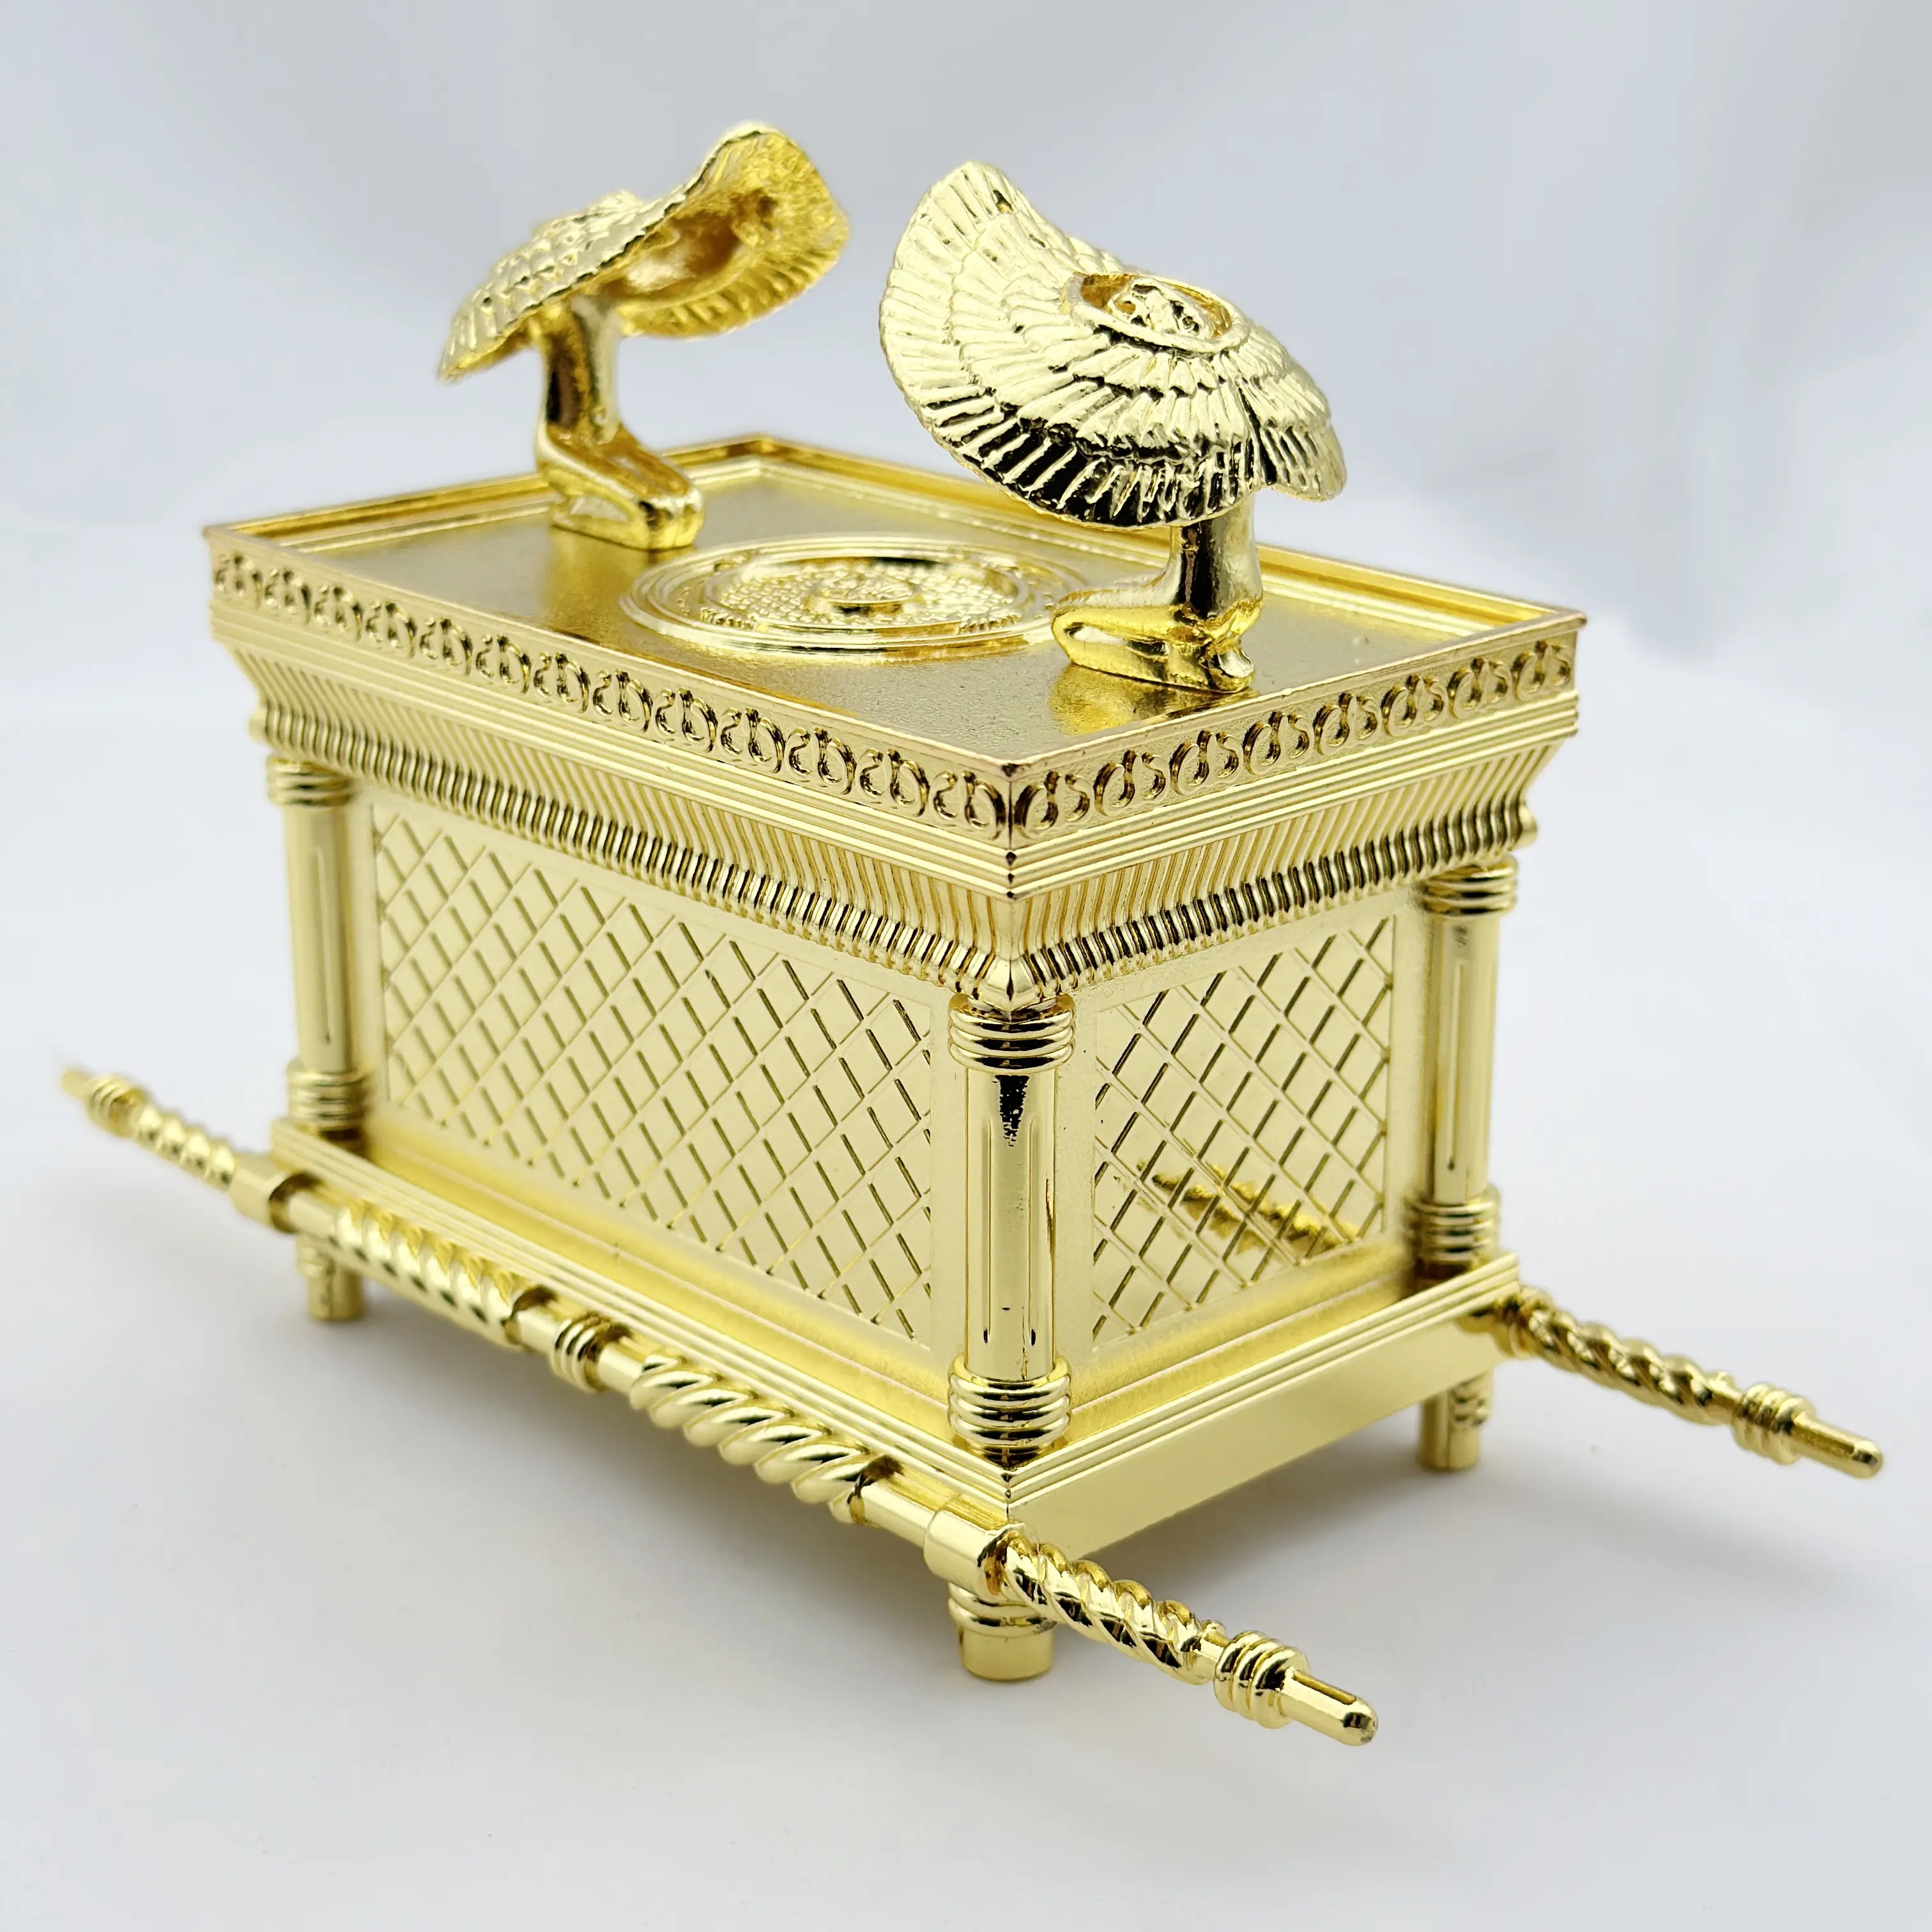 3 Sizes Ark of The Covenant without Base Isreal gift Figurine Home Decor